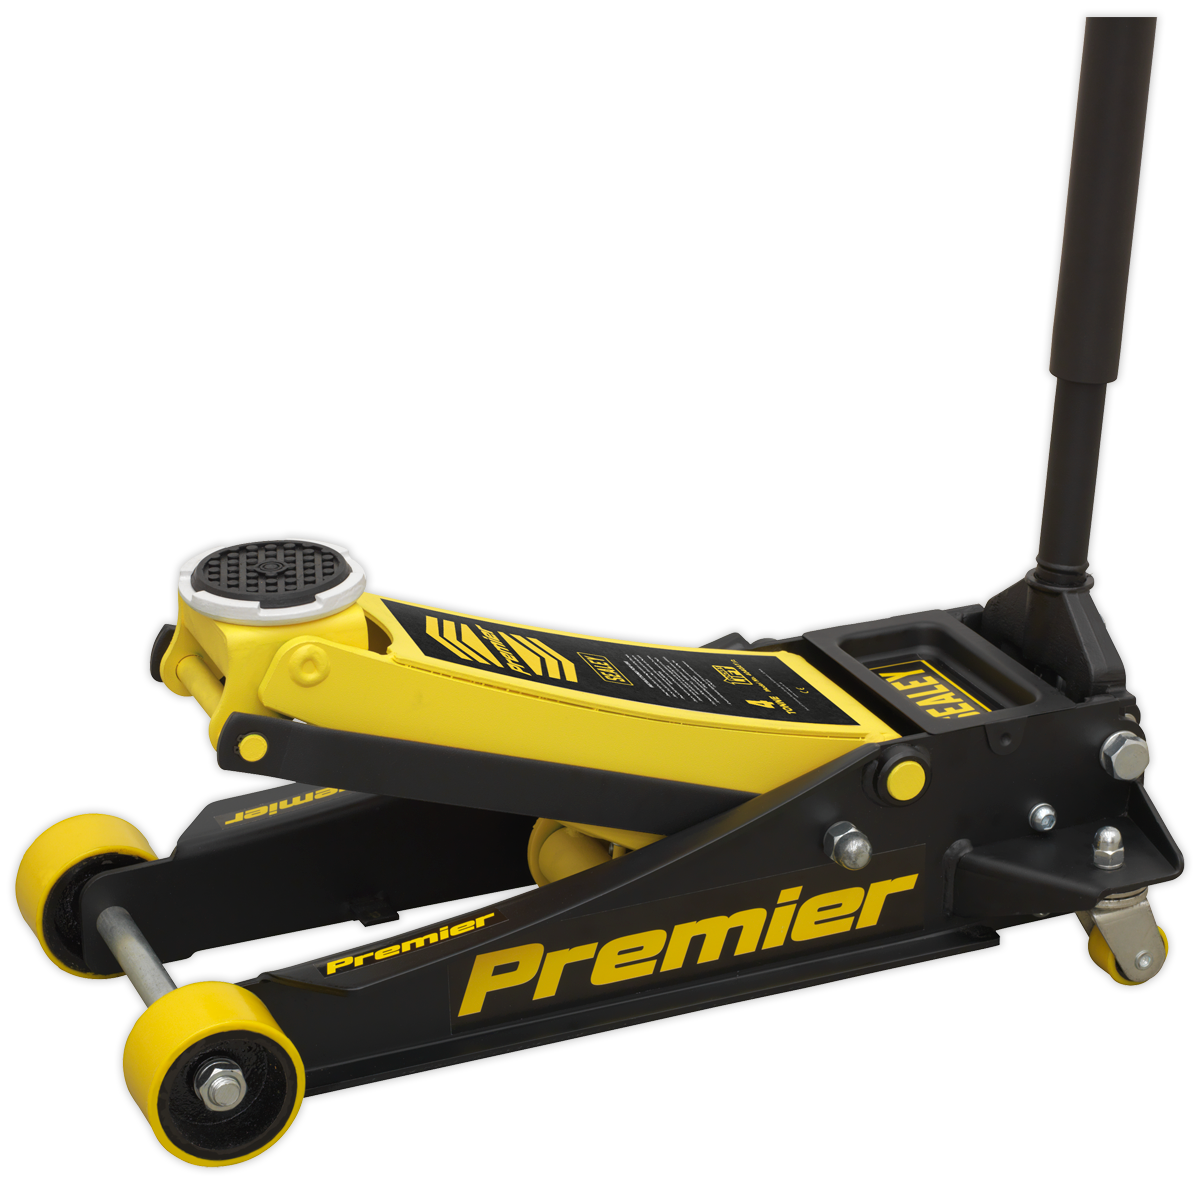 Sealey 4tonne Trolley Jack with Rocket Lift - Yellow 4040AY